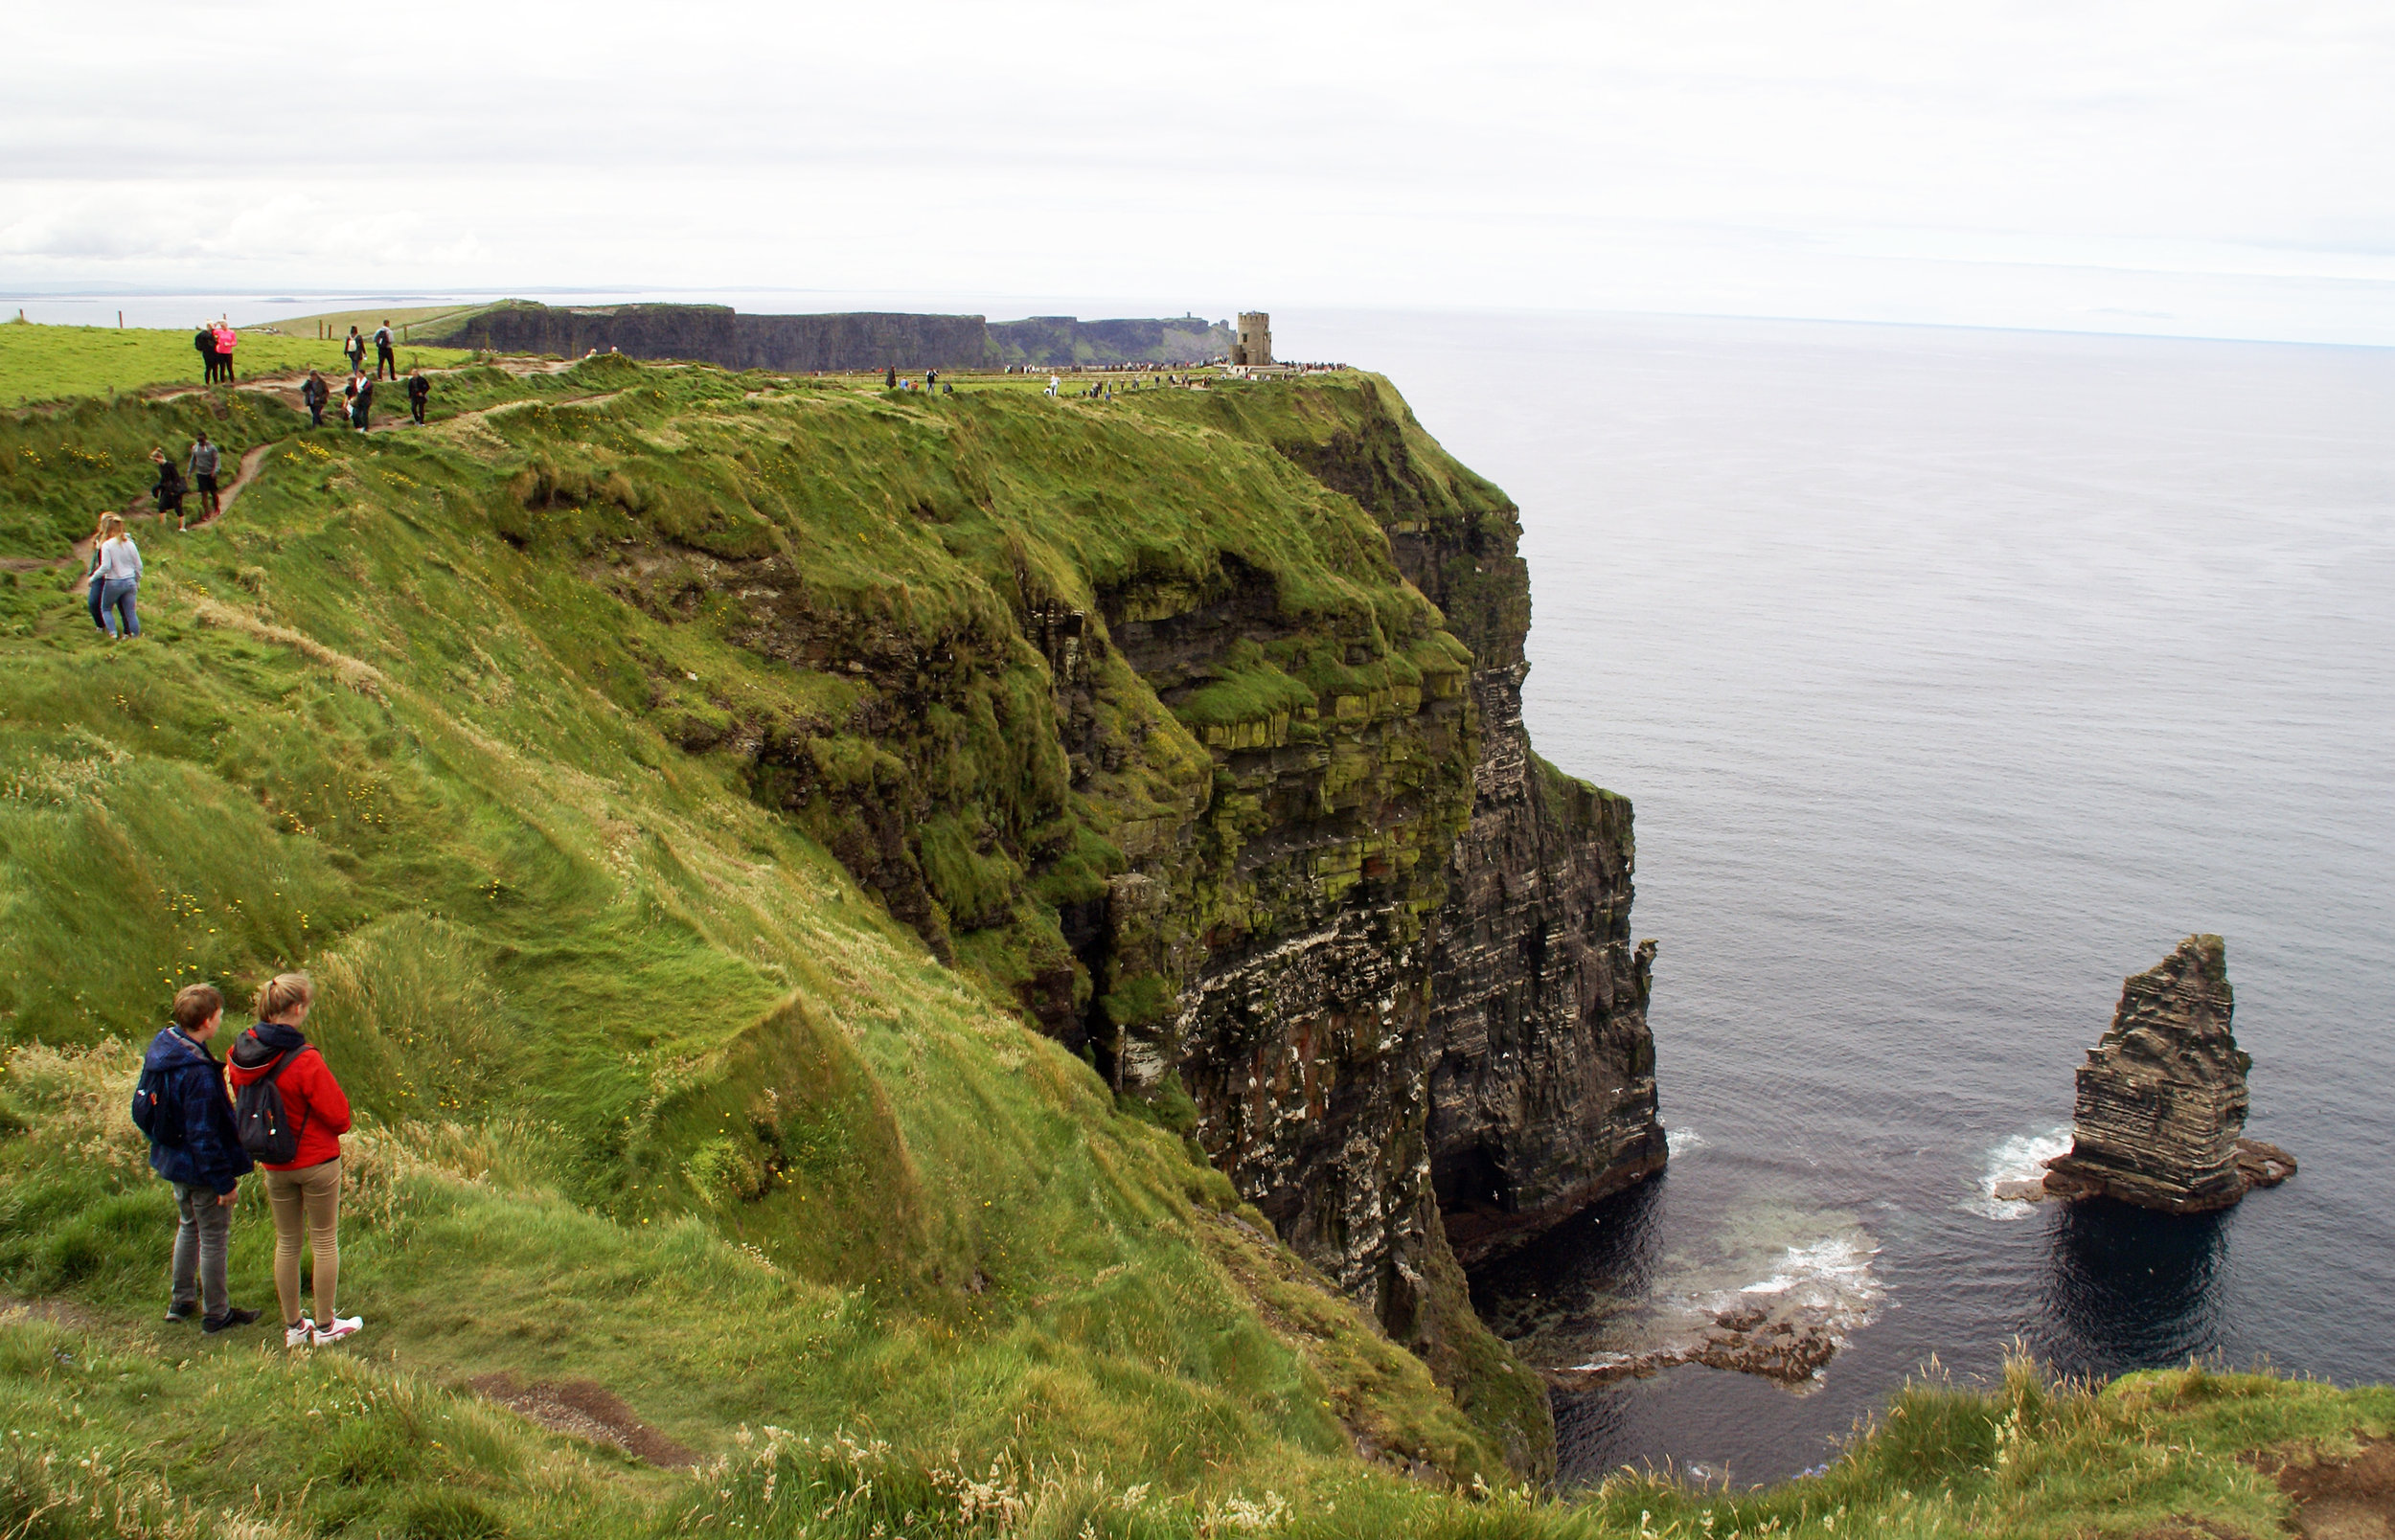  The breathtaking Cliffs of Moher with O'Brien's Tower visible in the distance. 